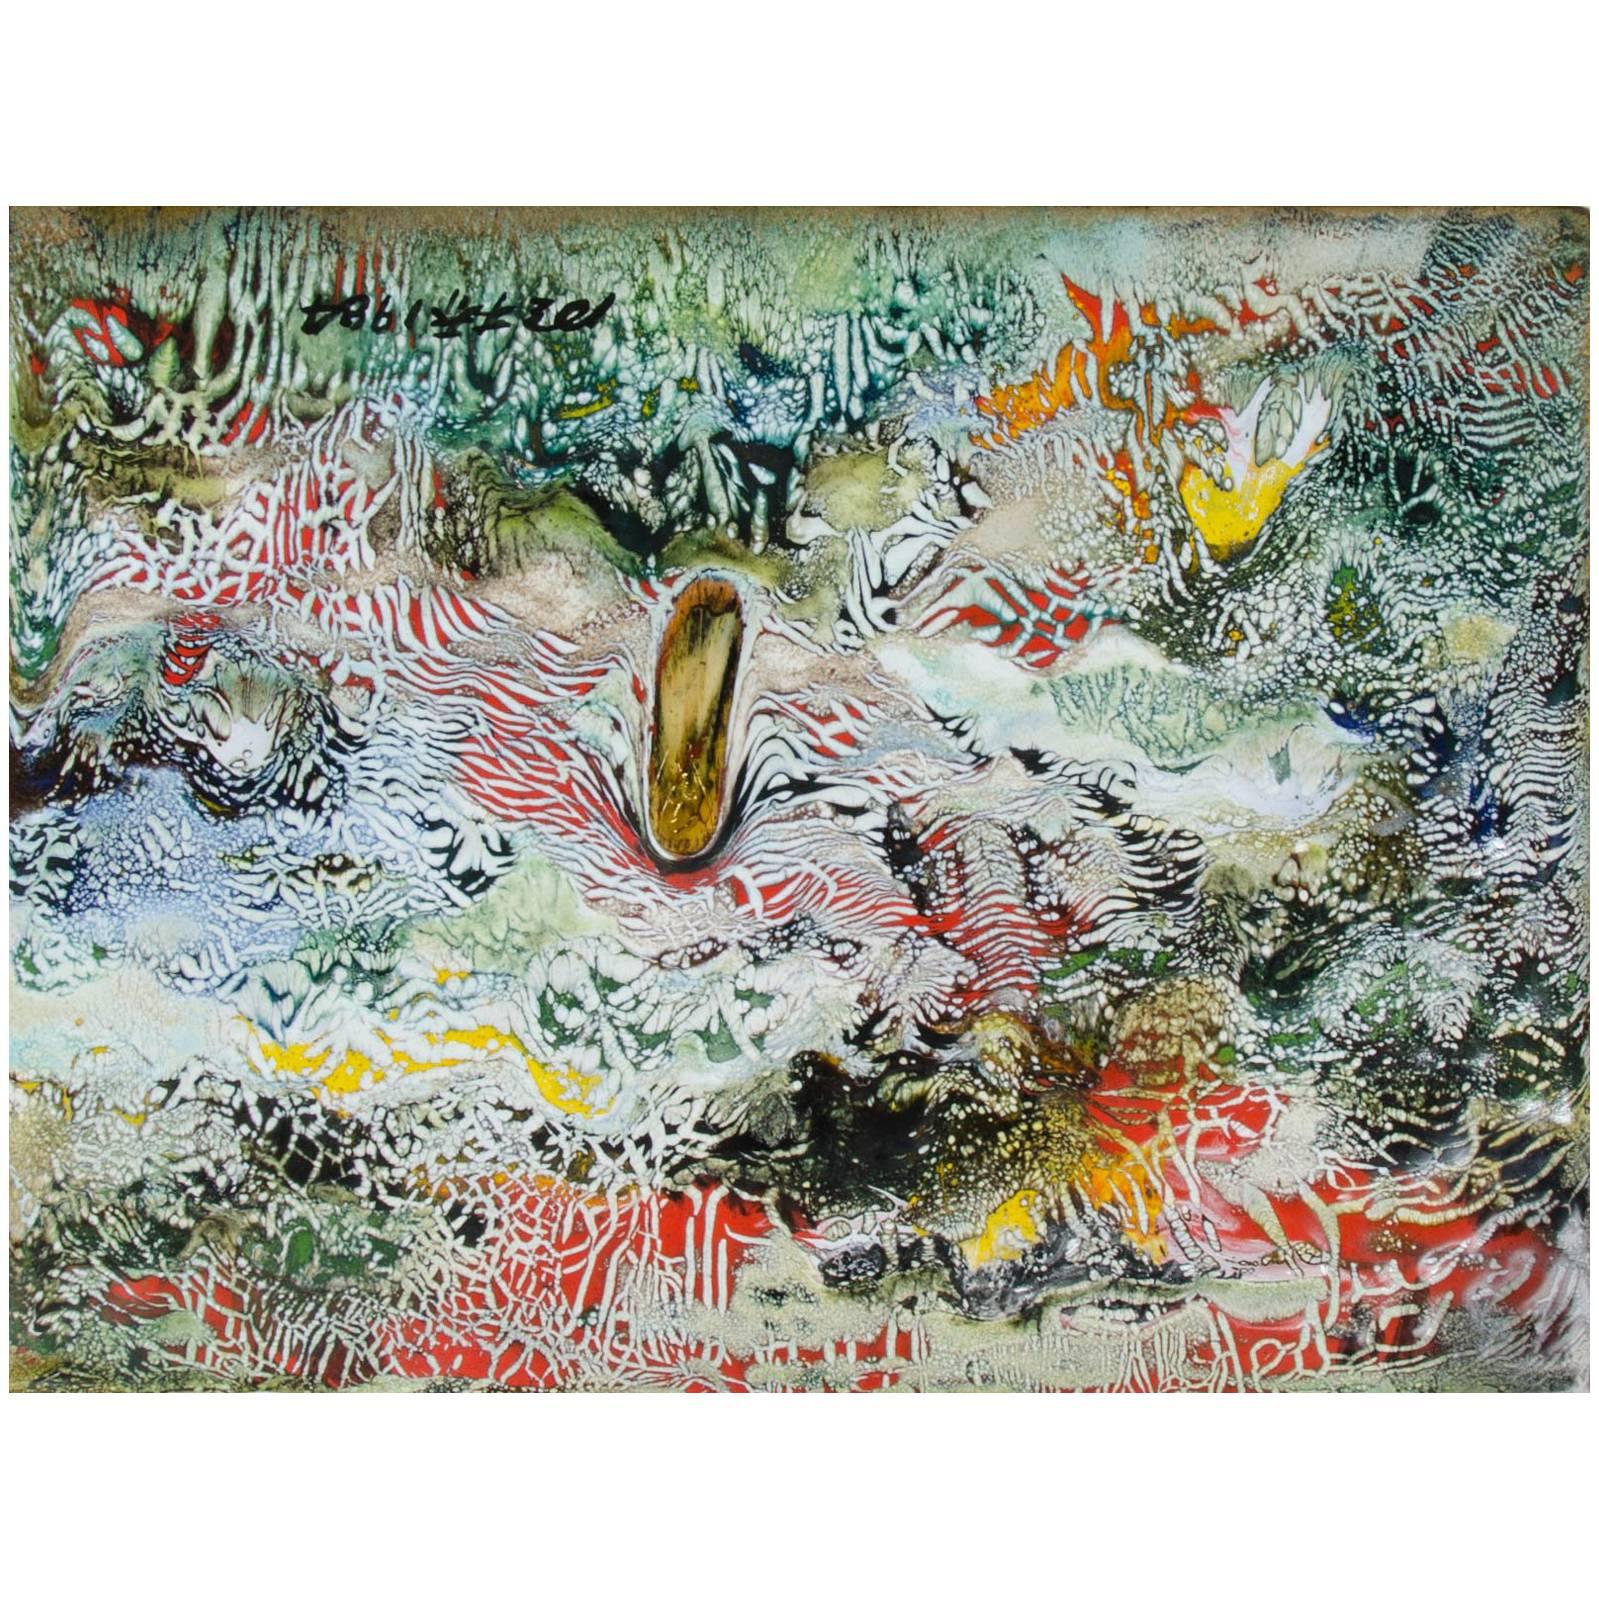 Untitled I by Ming Chiao Kuo, Enamel Painting on Copper, 1984, Framed